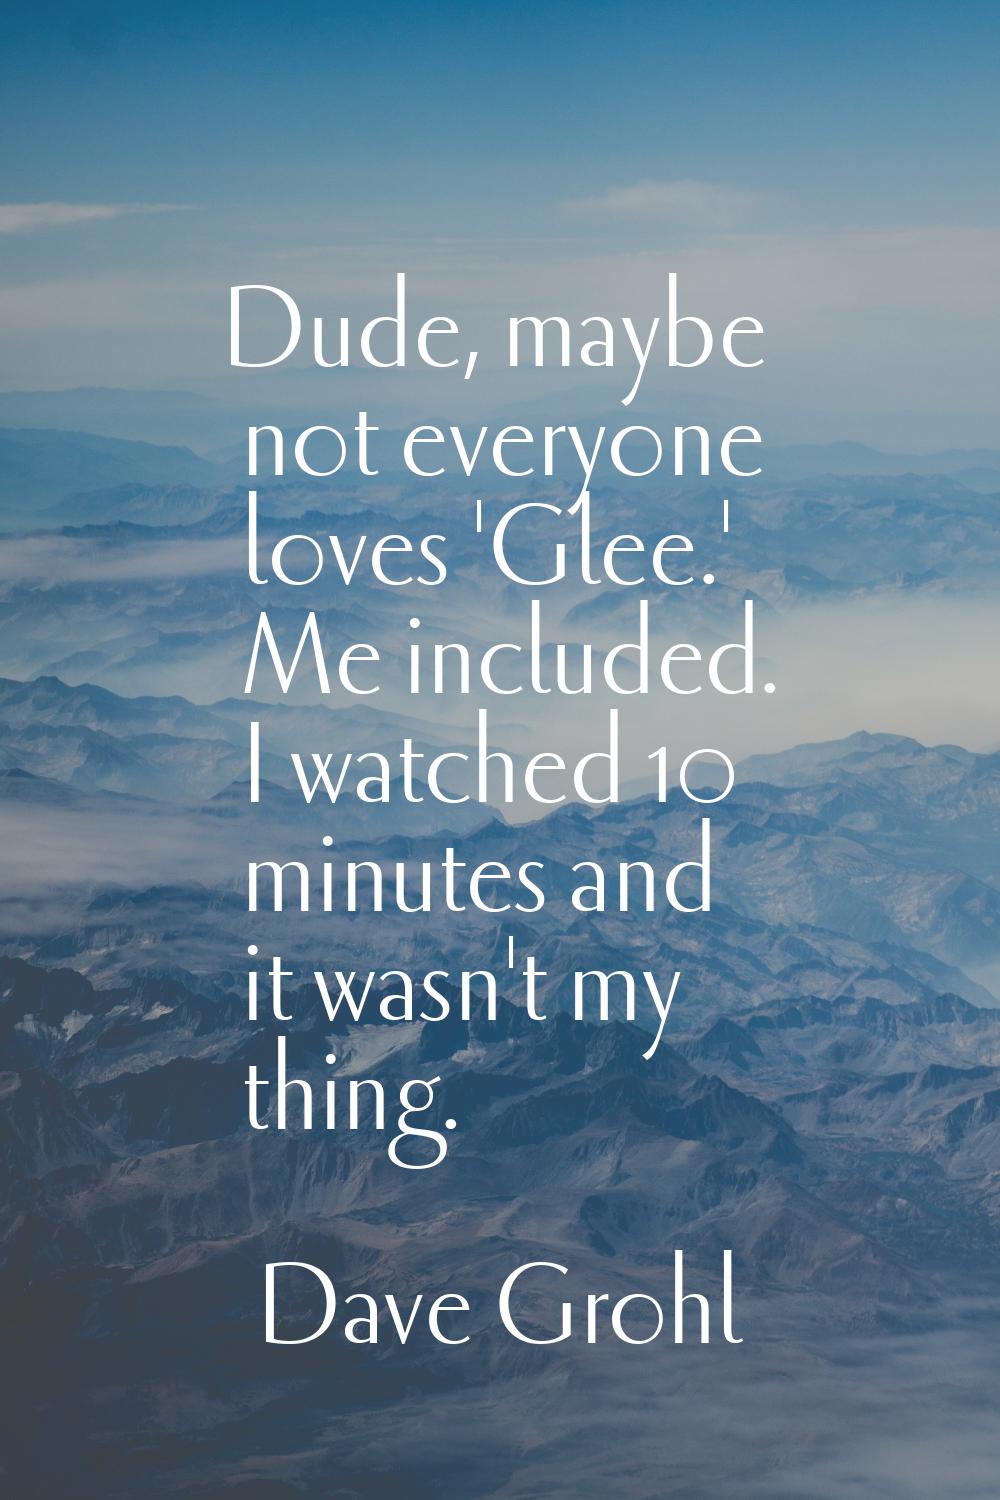 Dude, maybe not everyone loves 'Glee.' Me included. I watched 10 minutes and it wasn't my thing.